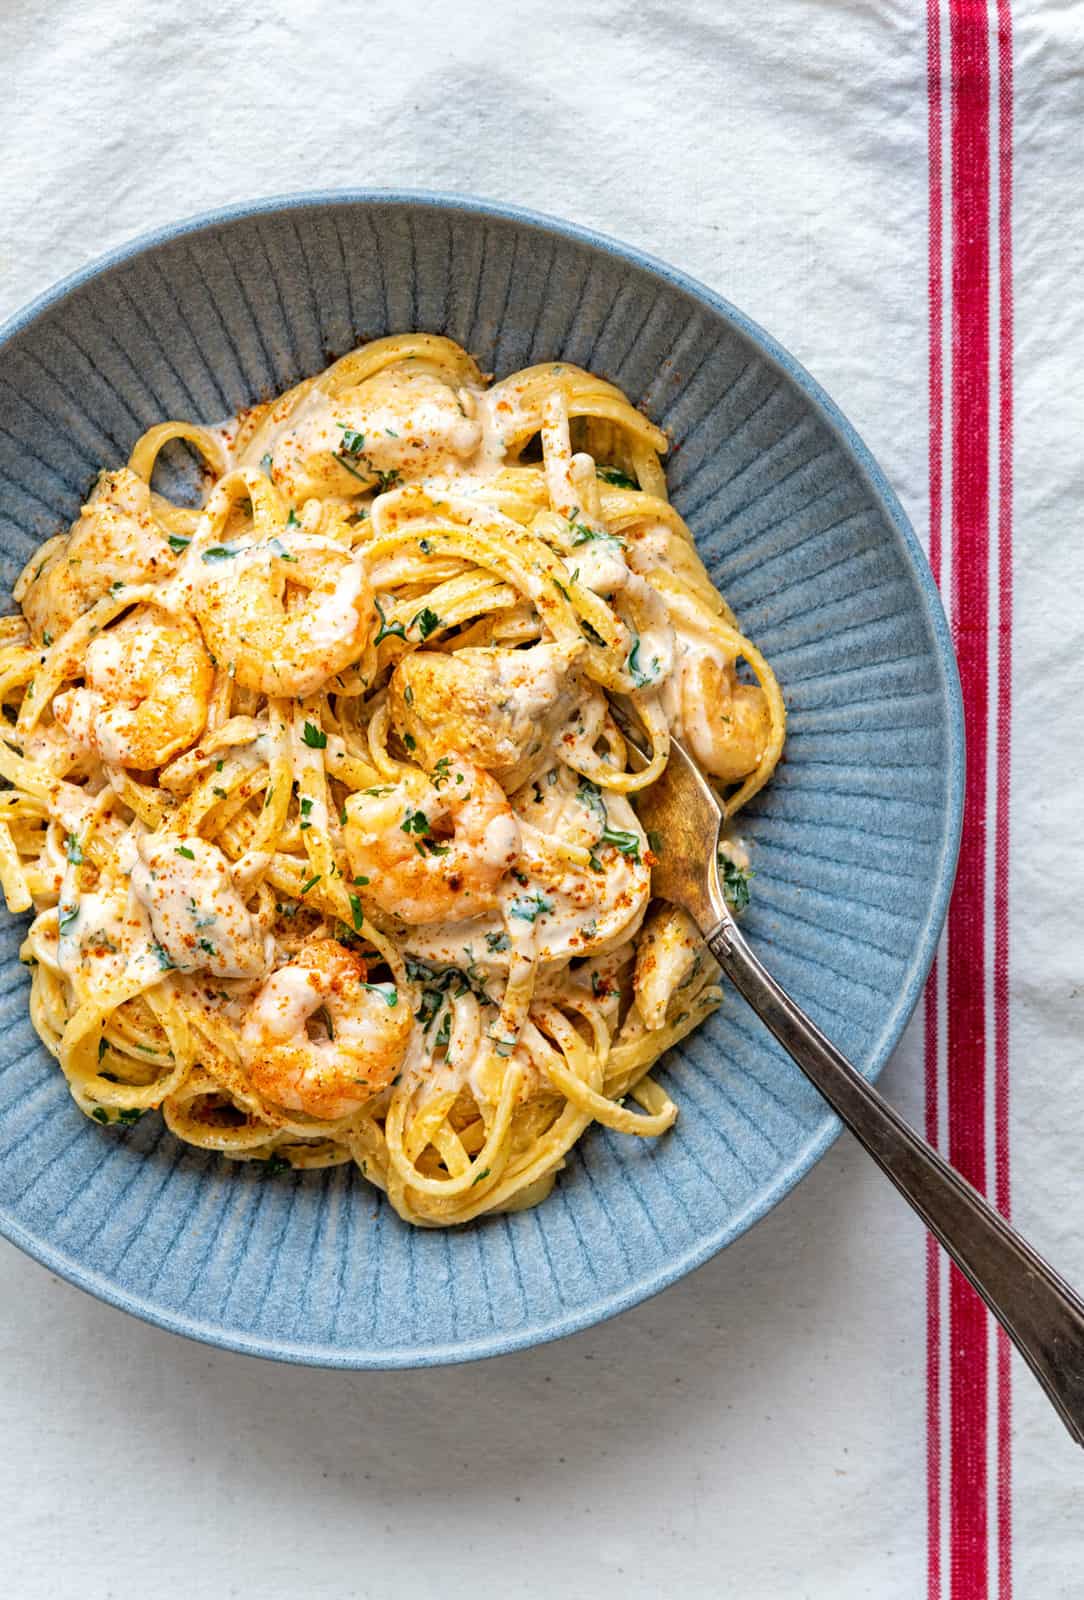 Linguine with Cajun Chicken and Shrimp Alfredo sauce in a grey bowl